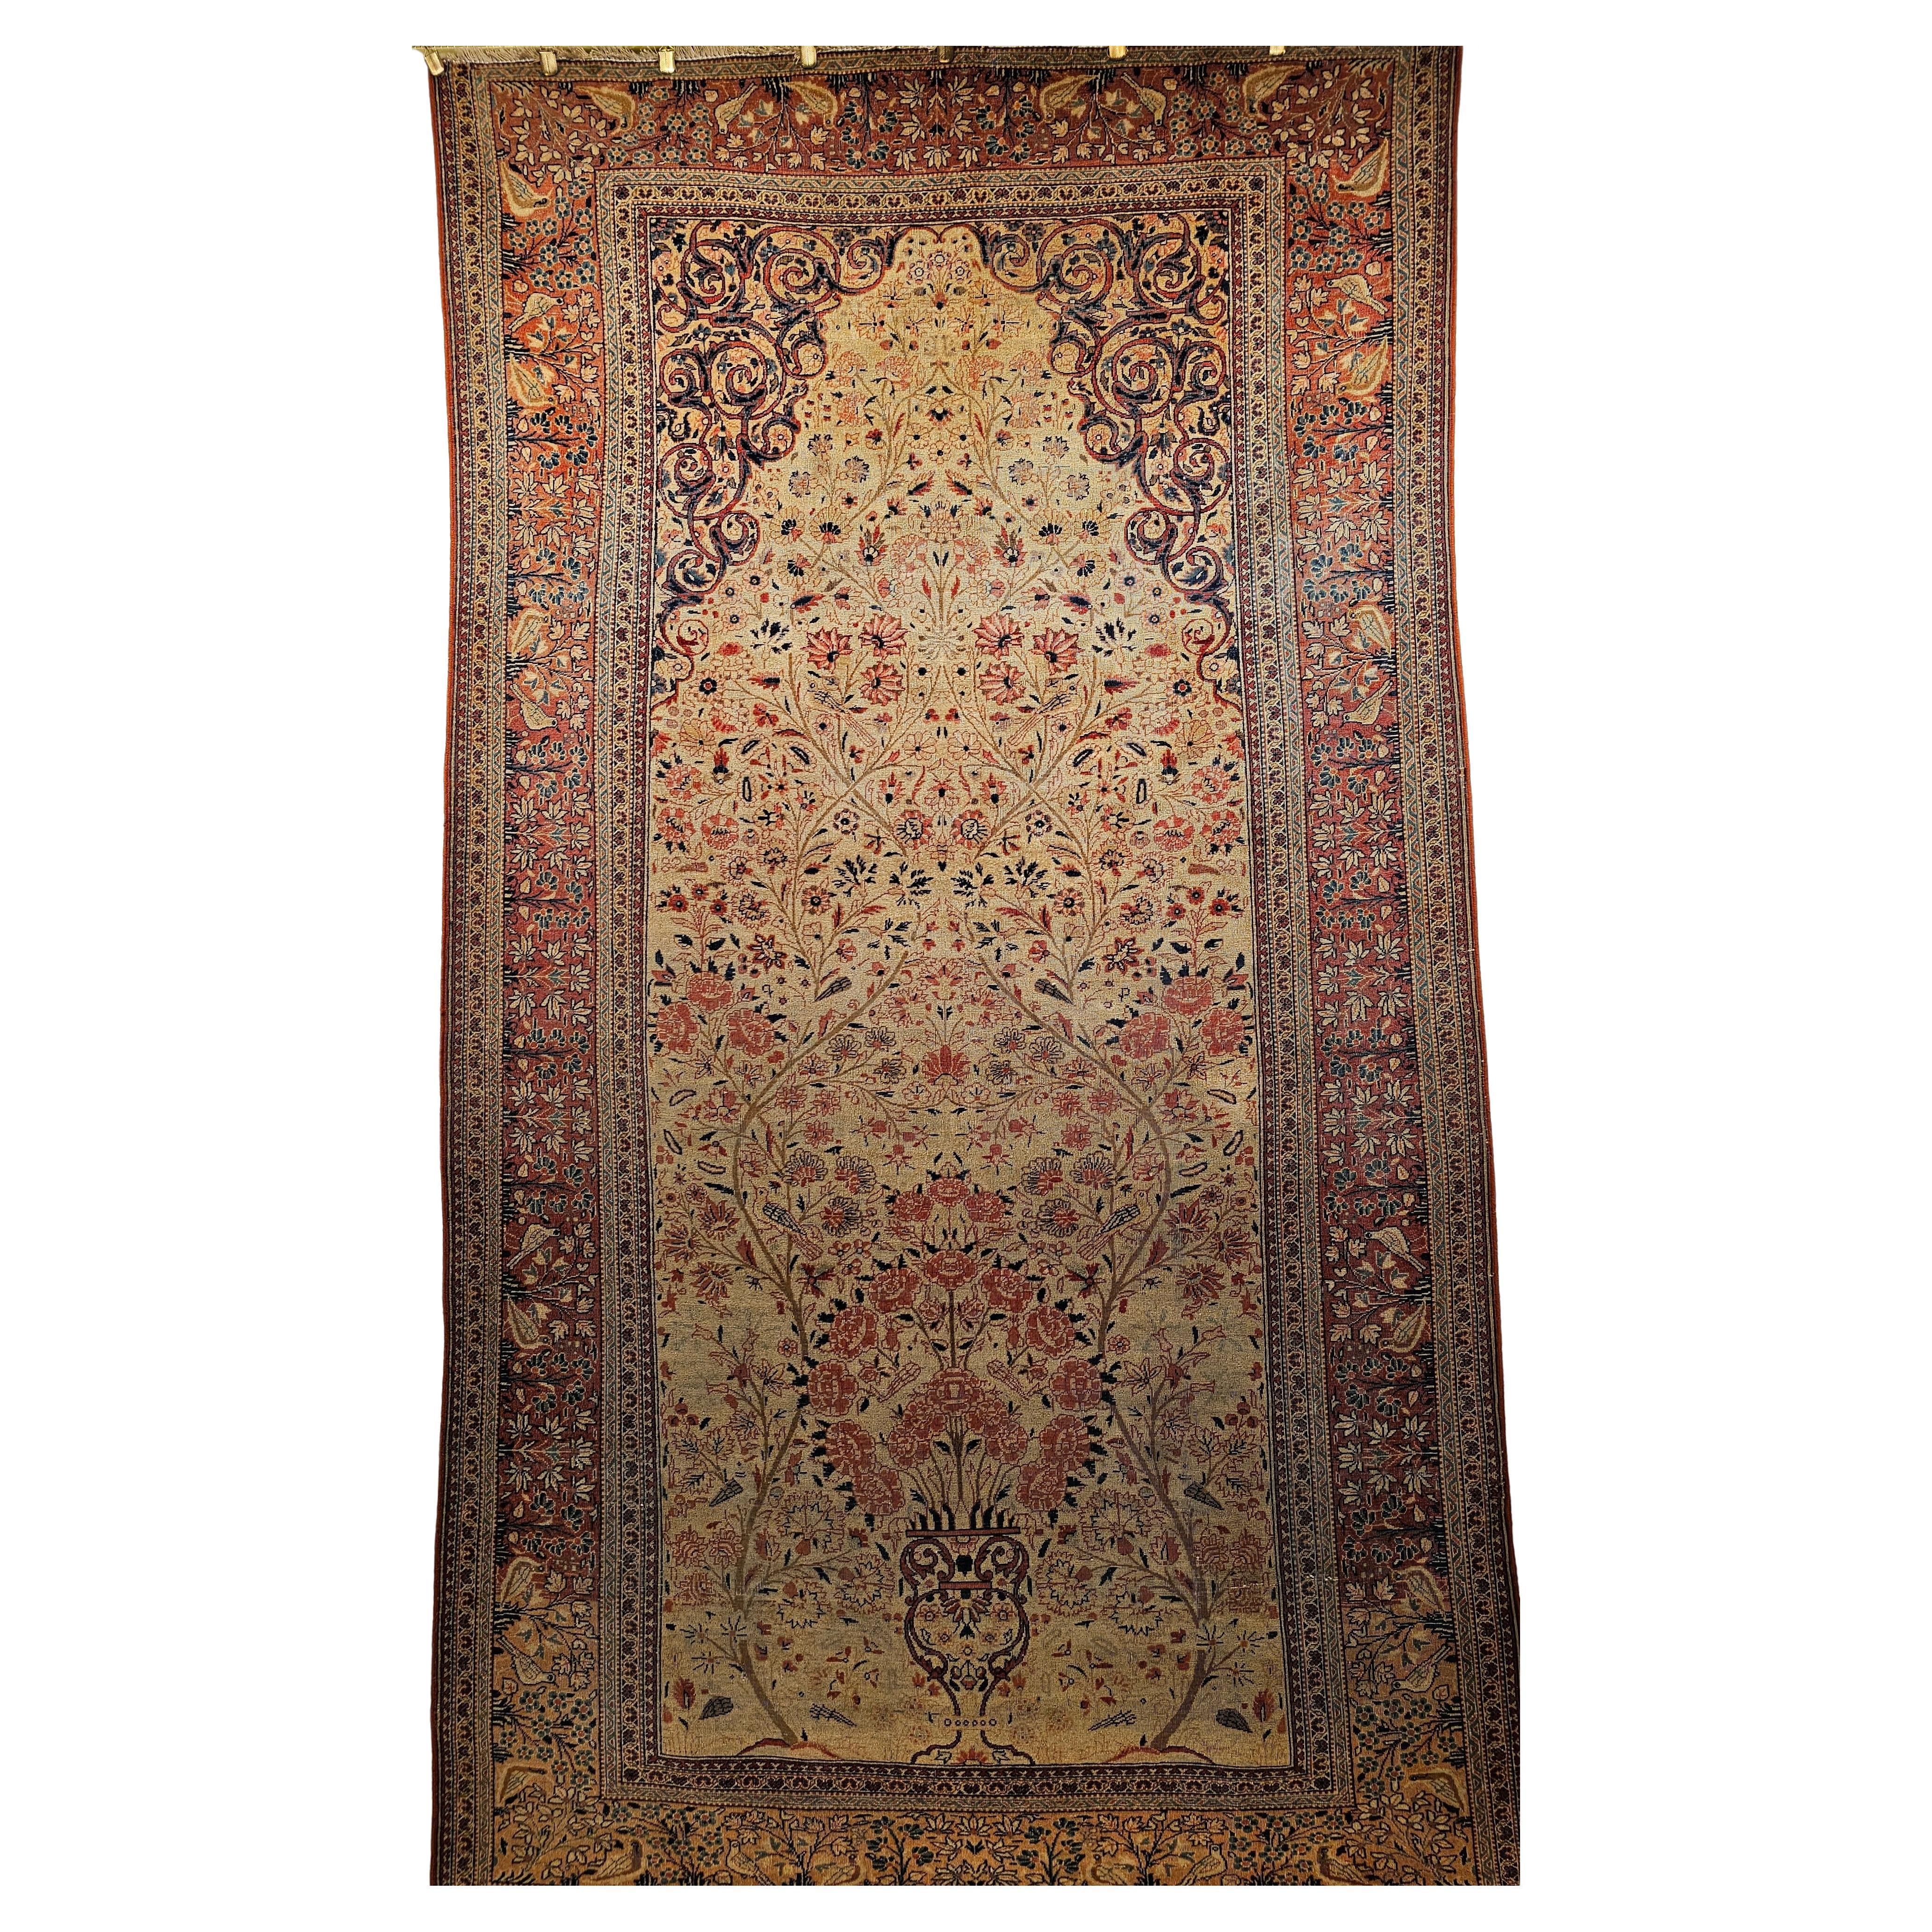 The 19th century Persian Kashan library rug with a Vase “Tree of Life” design with birds on branches elevating towards the heavens. The field is a very rare and desirable ivory color.   The gorgeous border is in a rust red color with the birds